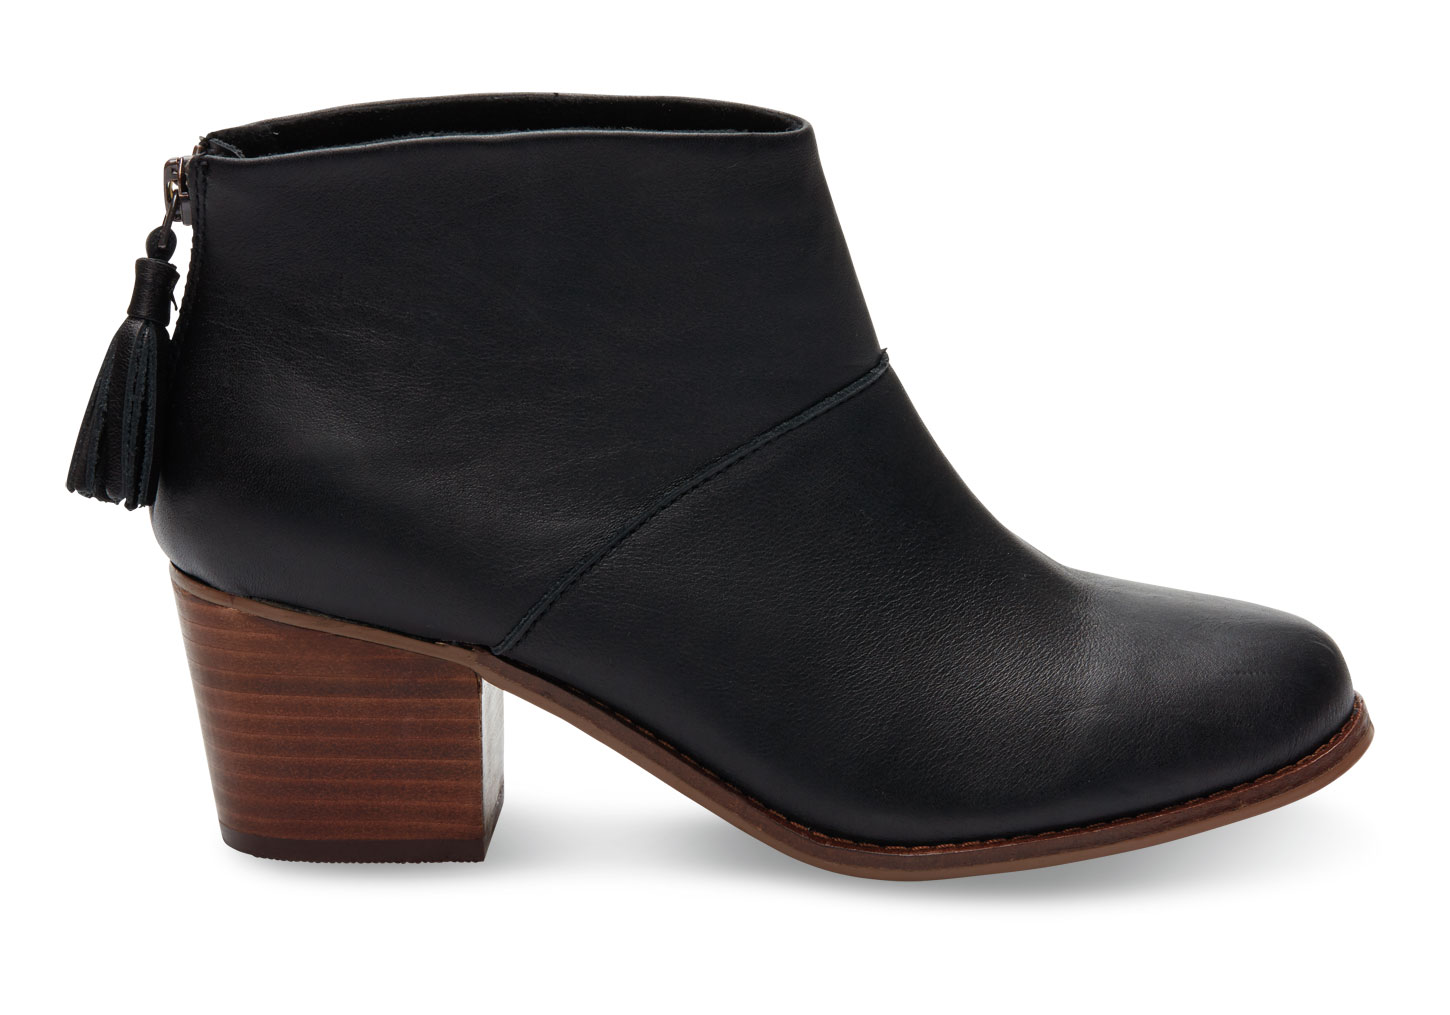 Maintaining Elegance by Sporting the  Evergreen black boots for women